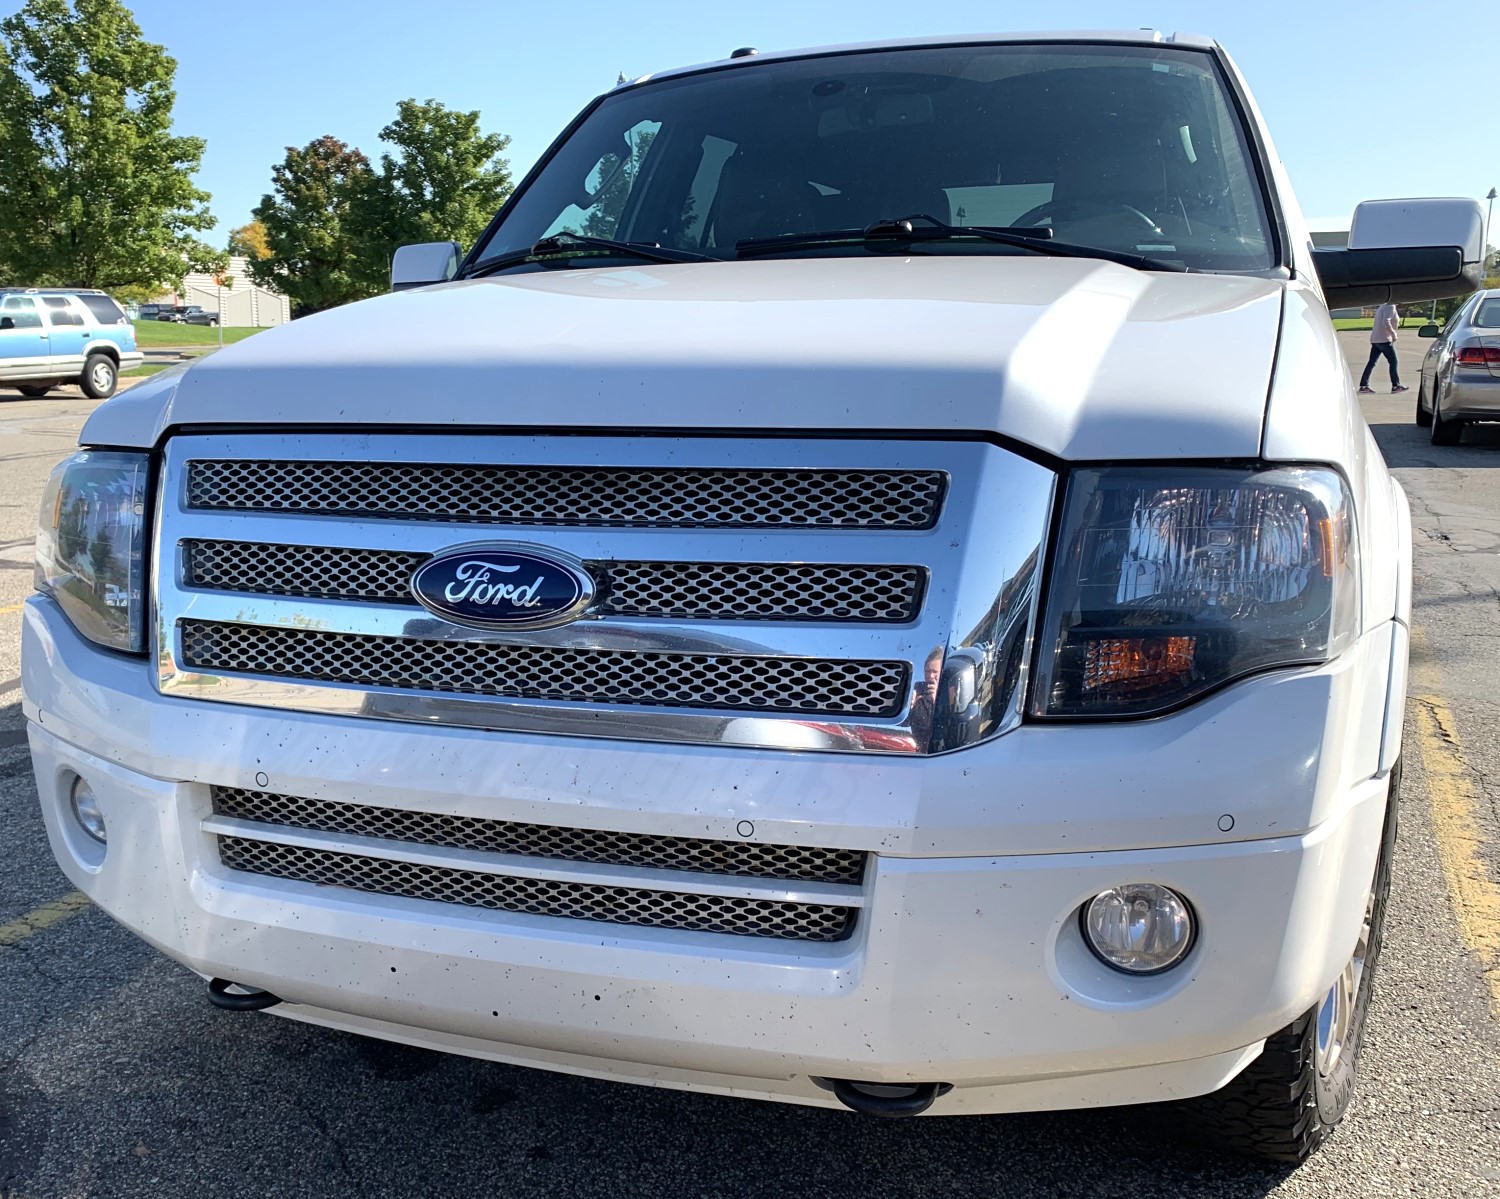 Spotlight on a Locally Modified Ford Expedition Grille with Perf GT Mesh